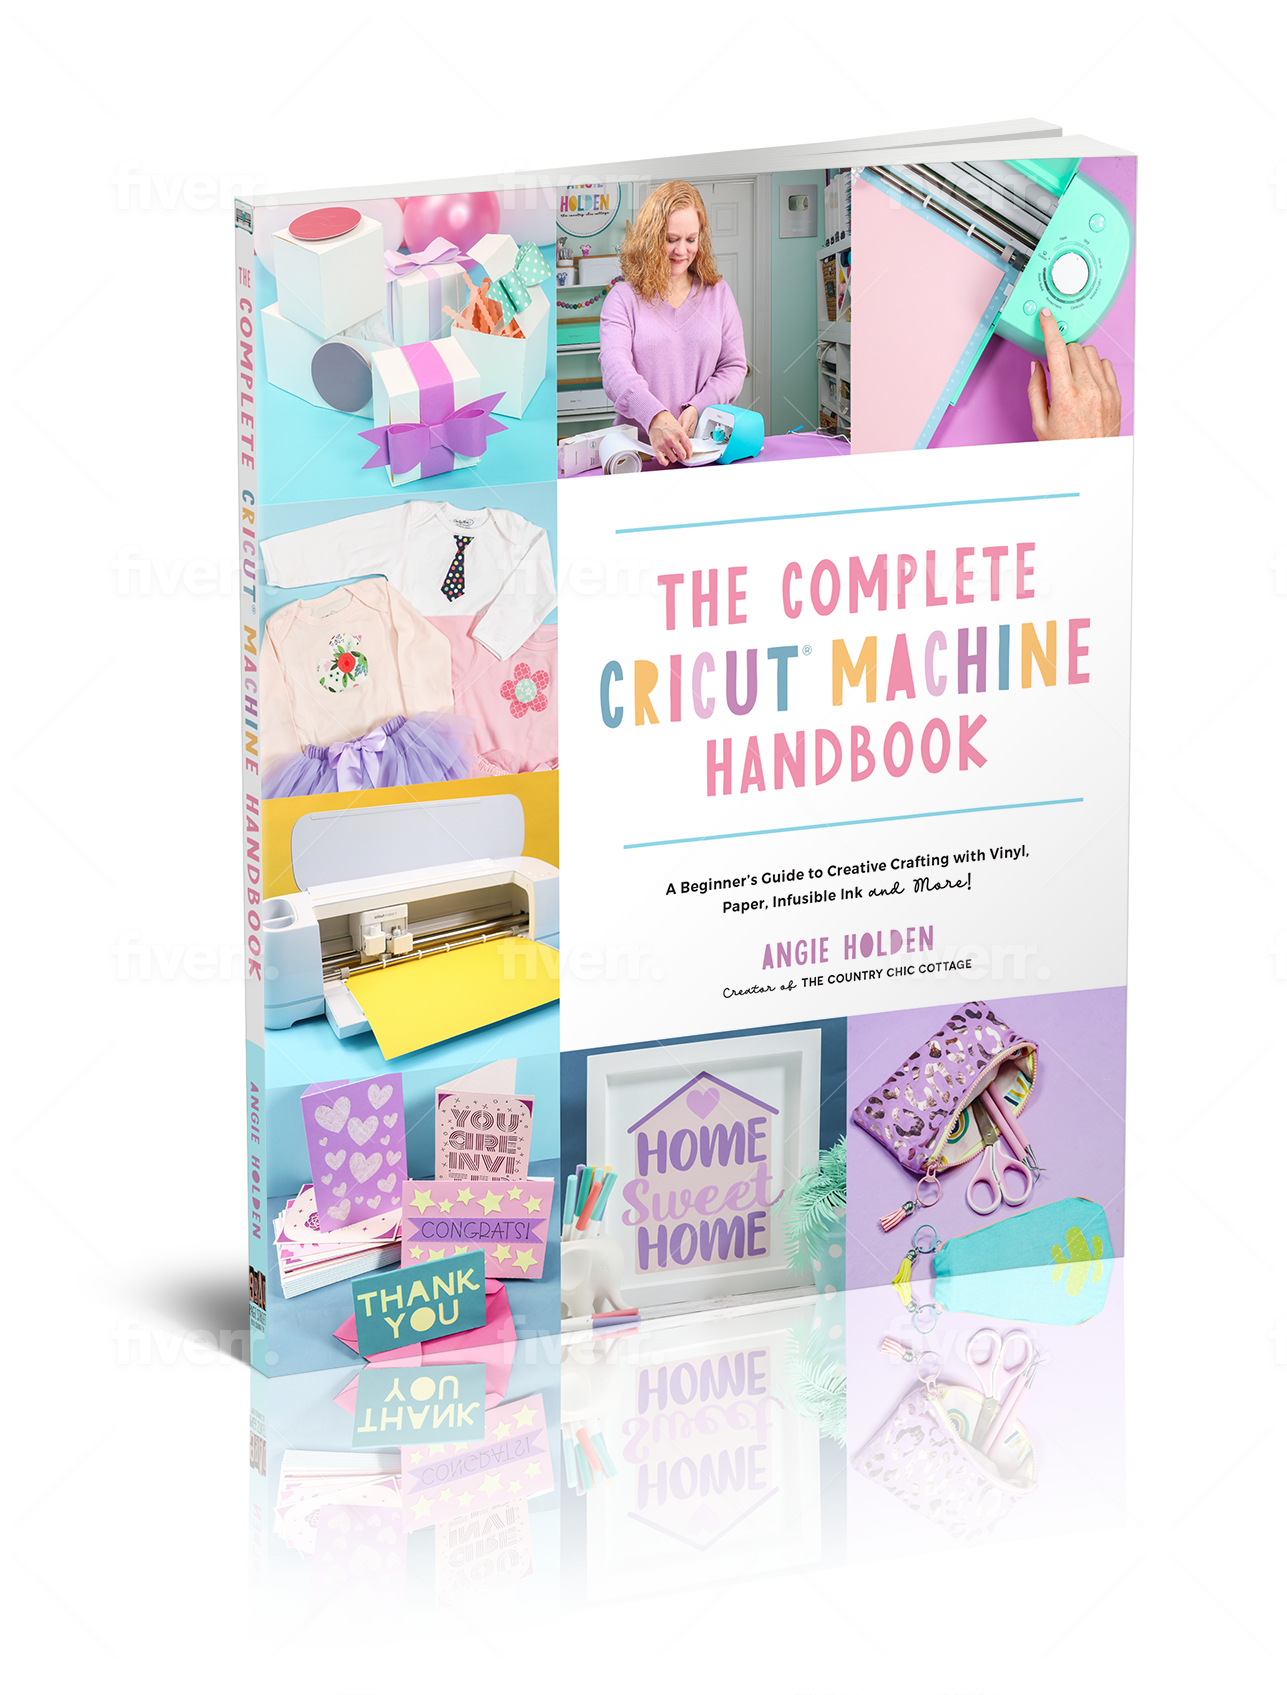 Cover of the Complete Cricut Handbook